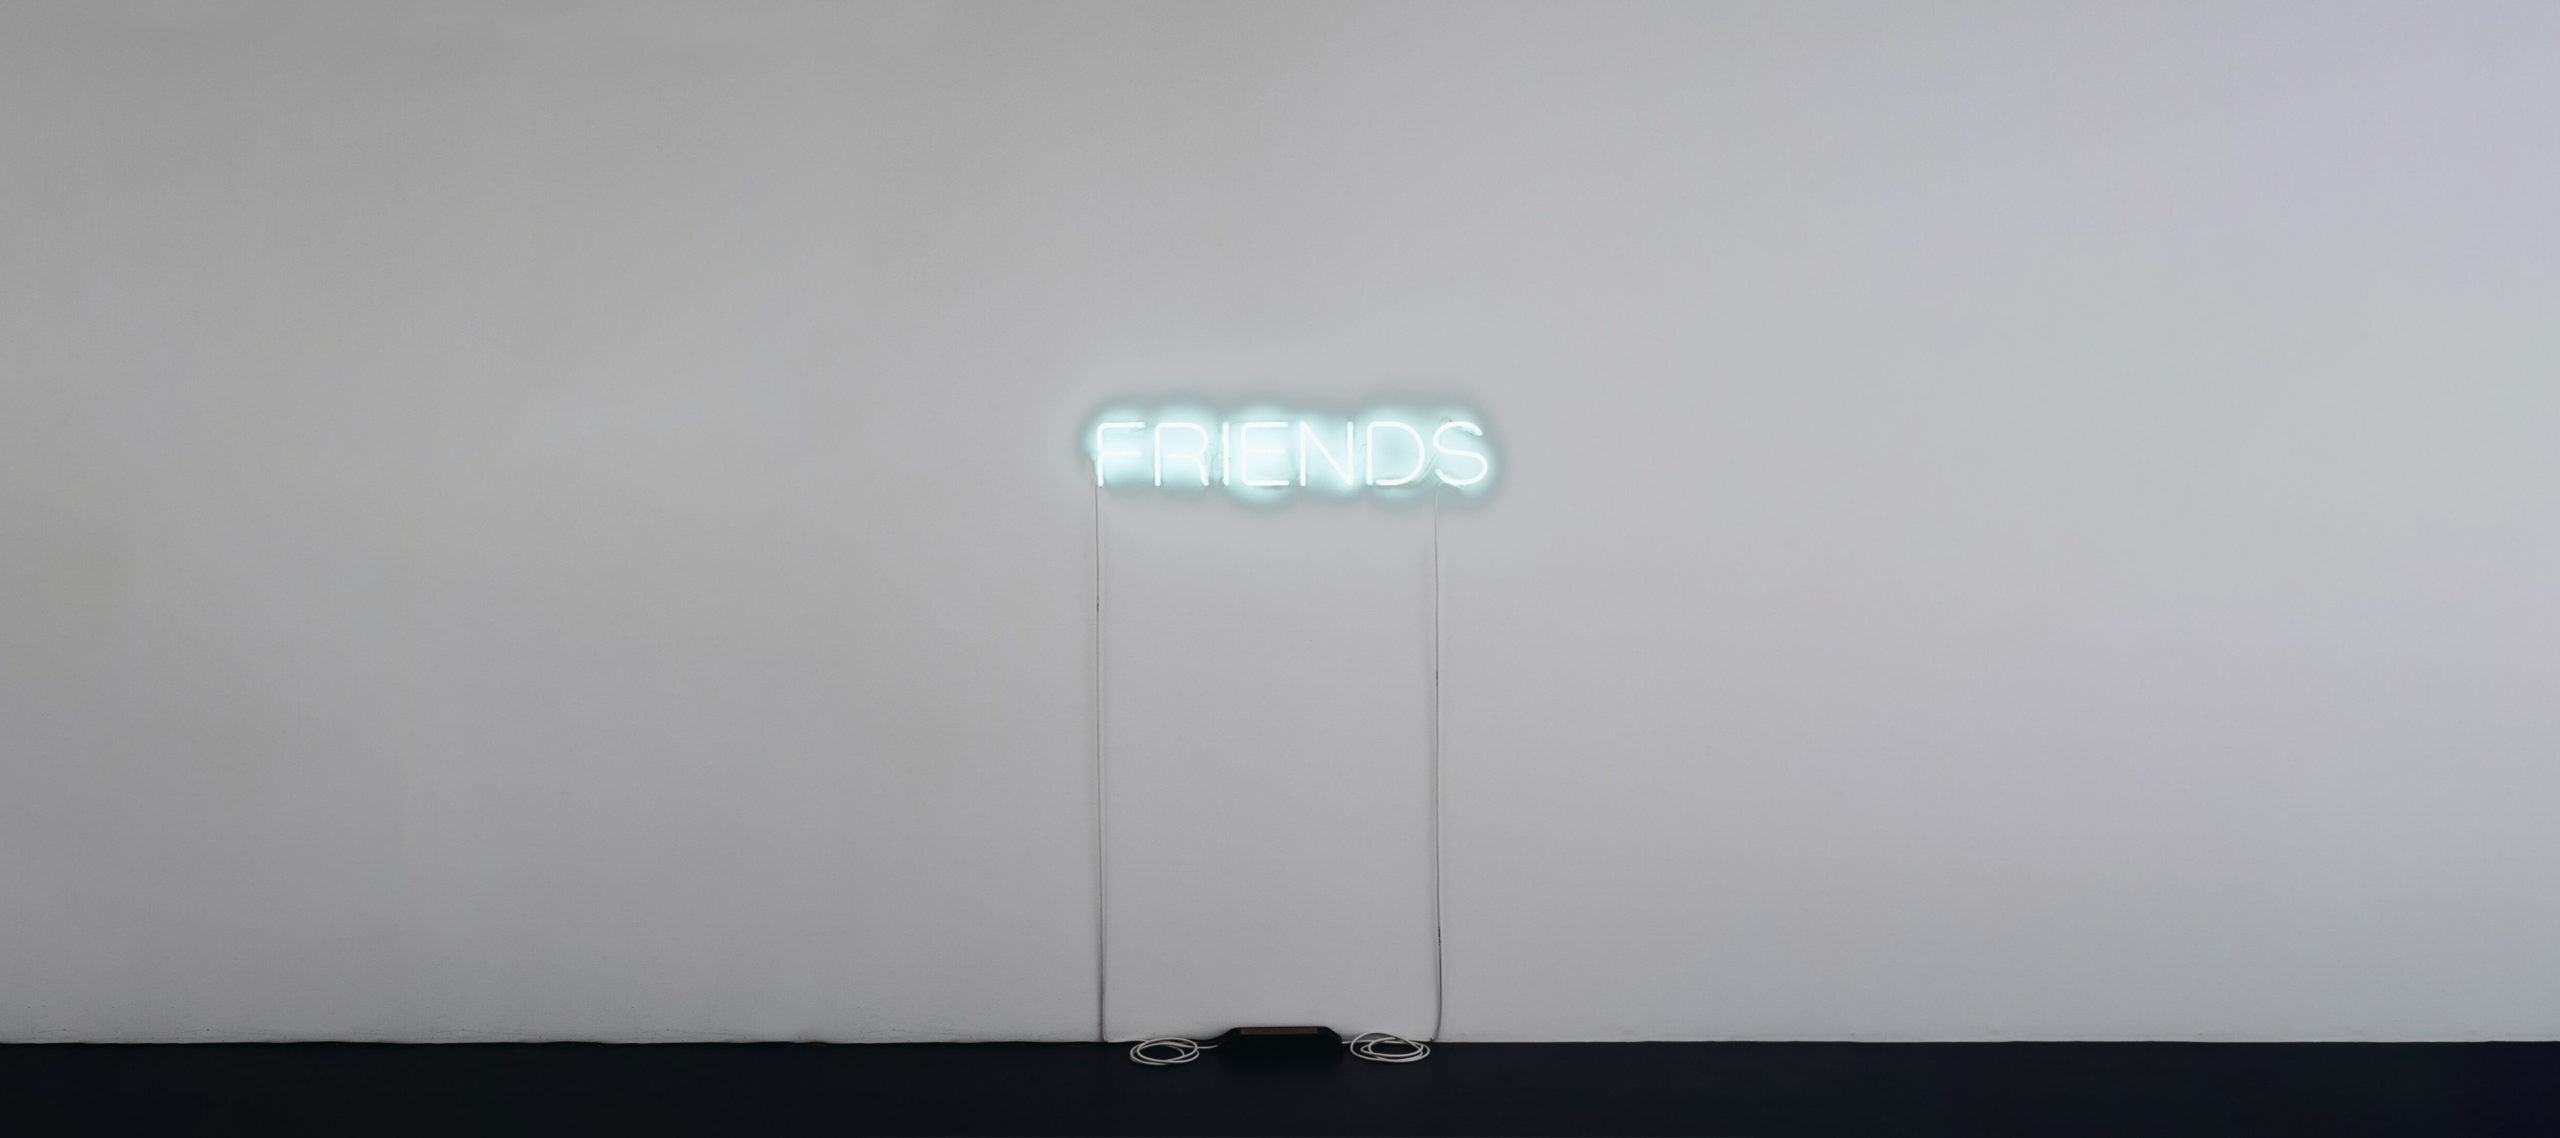 Martin Creed, Work No. 669 (FRIENDS), 2007 © Martin Creed. All Rights Reserved, DACS 2021. Photo: Mike Bruce 